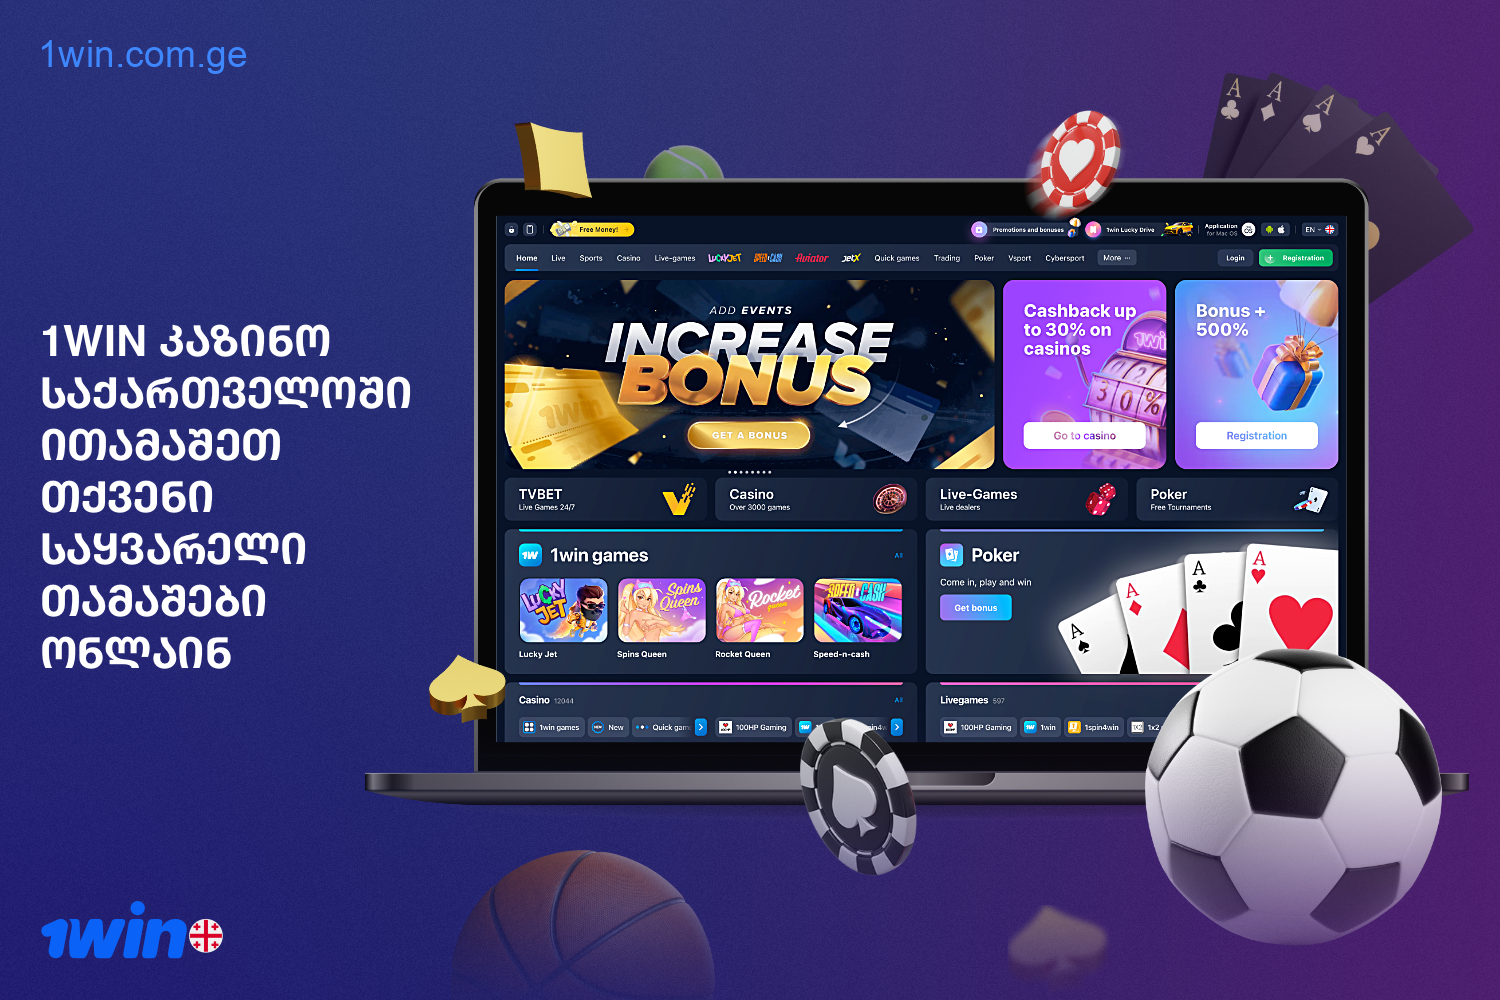 1win offers hundreds of gambling experiences to its Georgian customers, including slots, card games, live dealer games and more